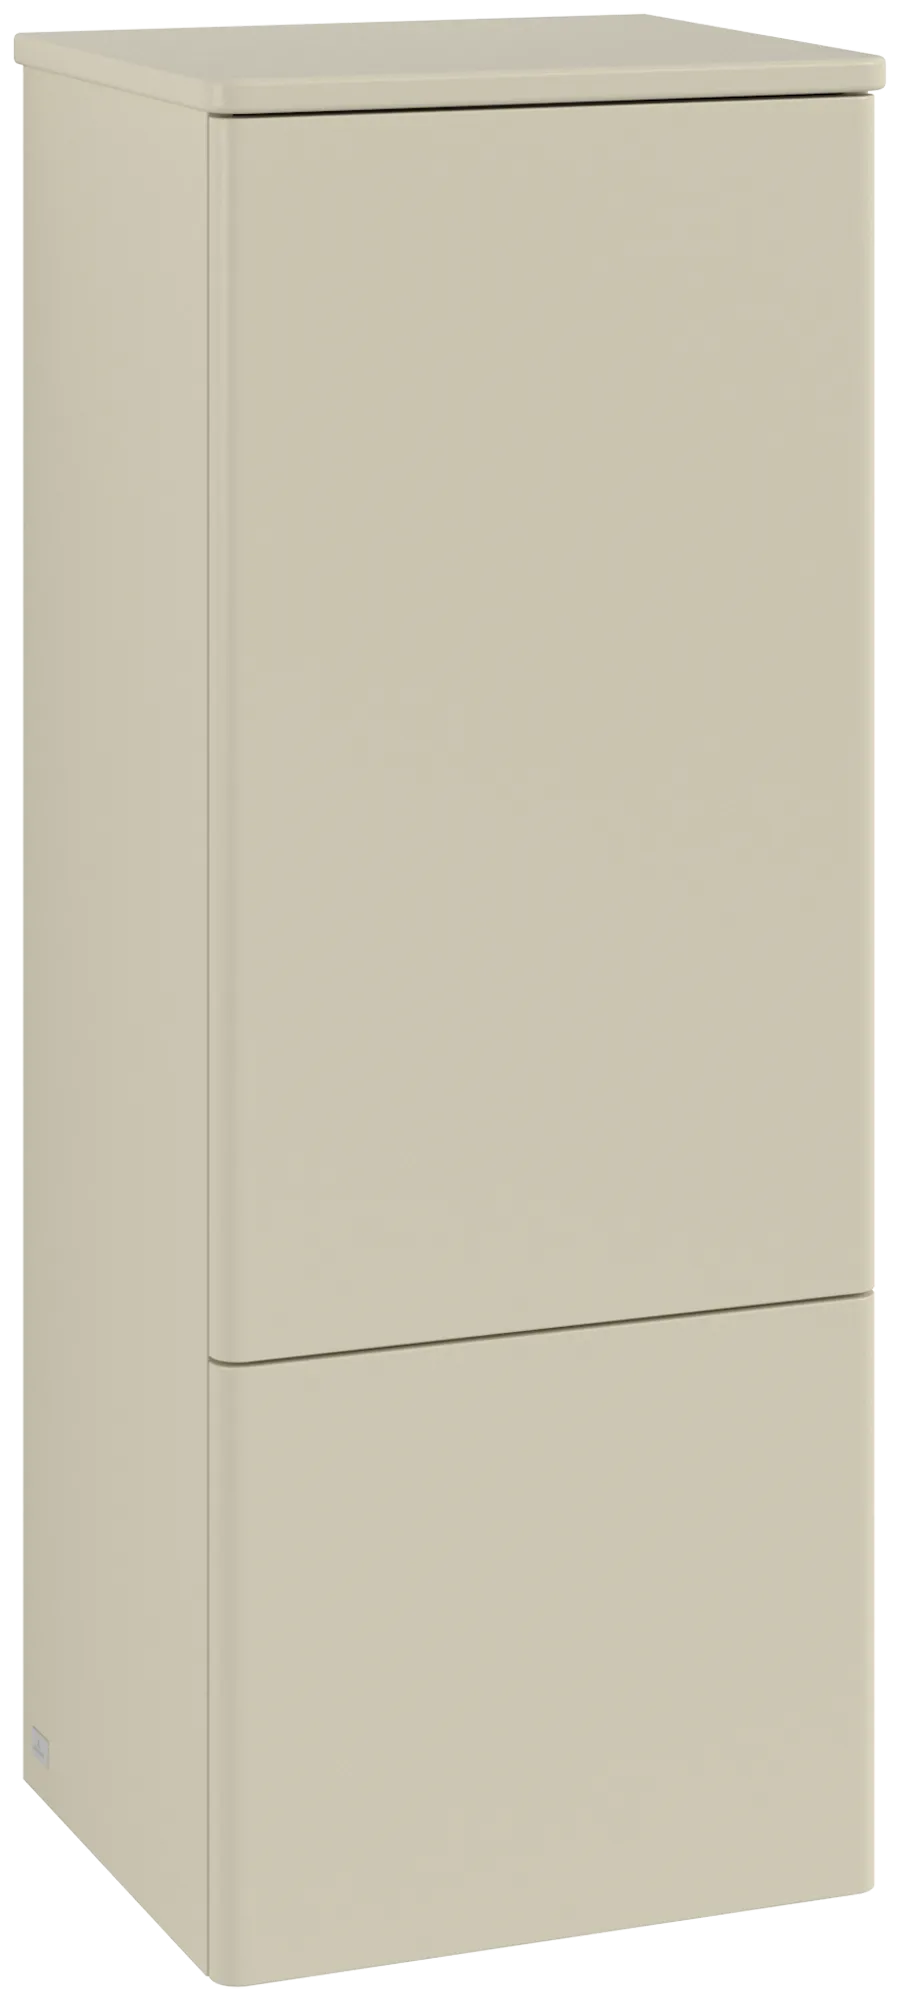 VILLEROY BOCH Antao Medium-height cabinet, with lighting, 1 door, 414 x 1039 x 356 mm, Front without structure, Silk Grey Matt Lacquer / Silk Grey Matt Lacquer #L44000HJ resmi